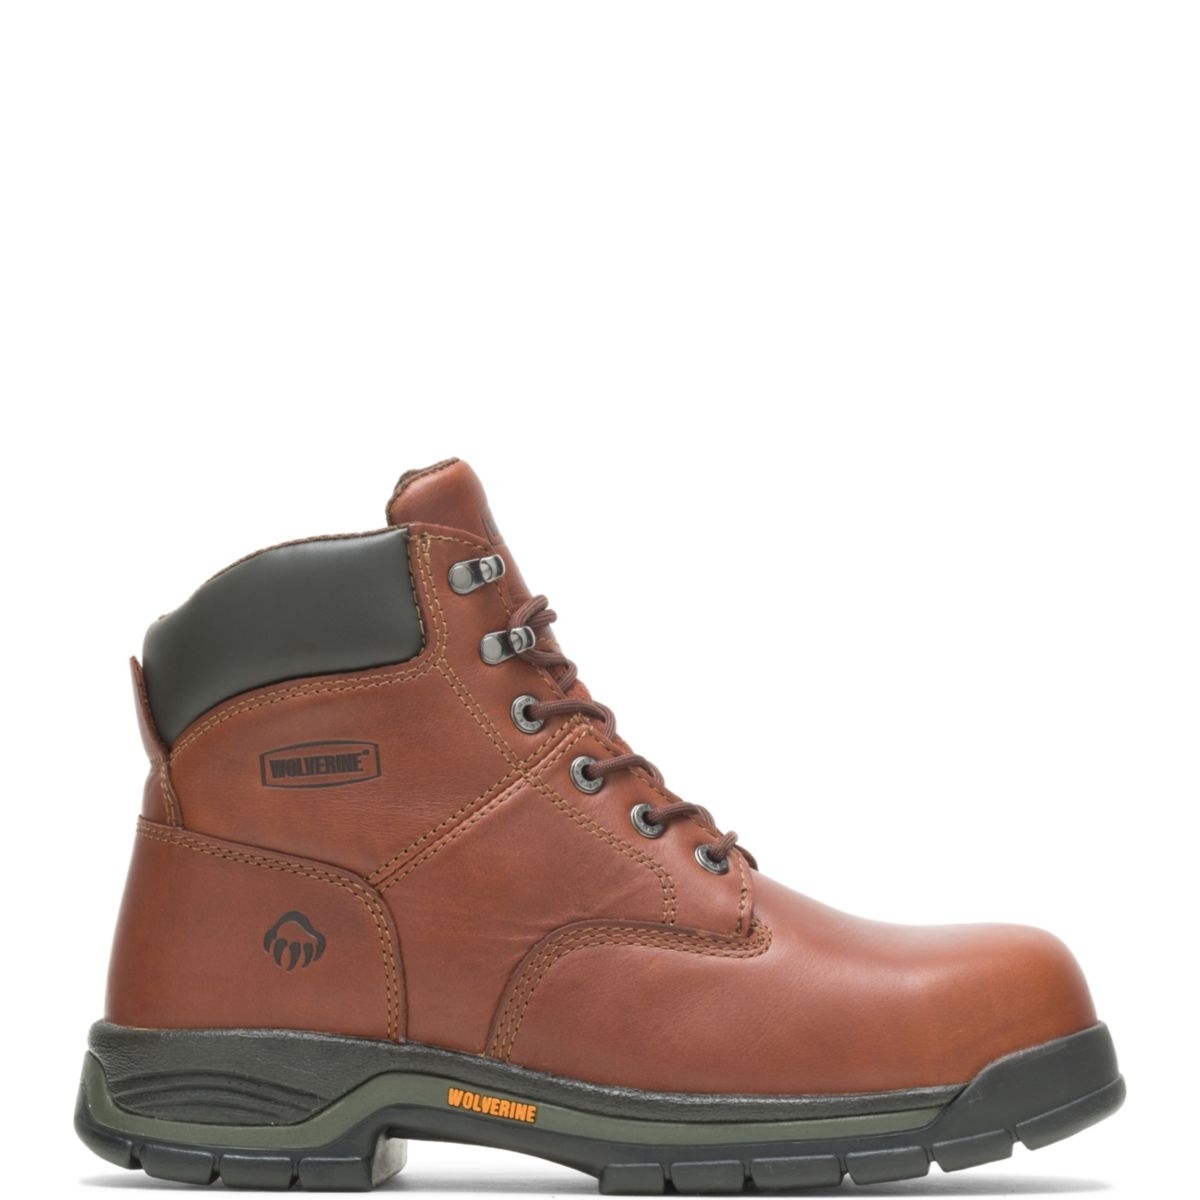 WOLVERINE Men's Harrison 6 Lace-Up SoftToe Work Boot Brown - W04906 Varies BROWN - BROWN, 8.5